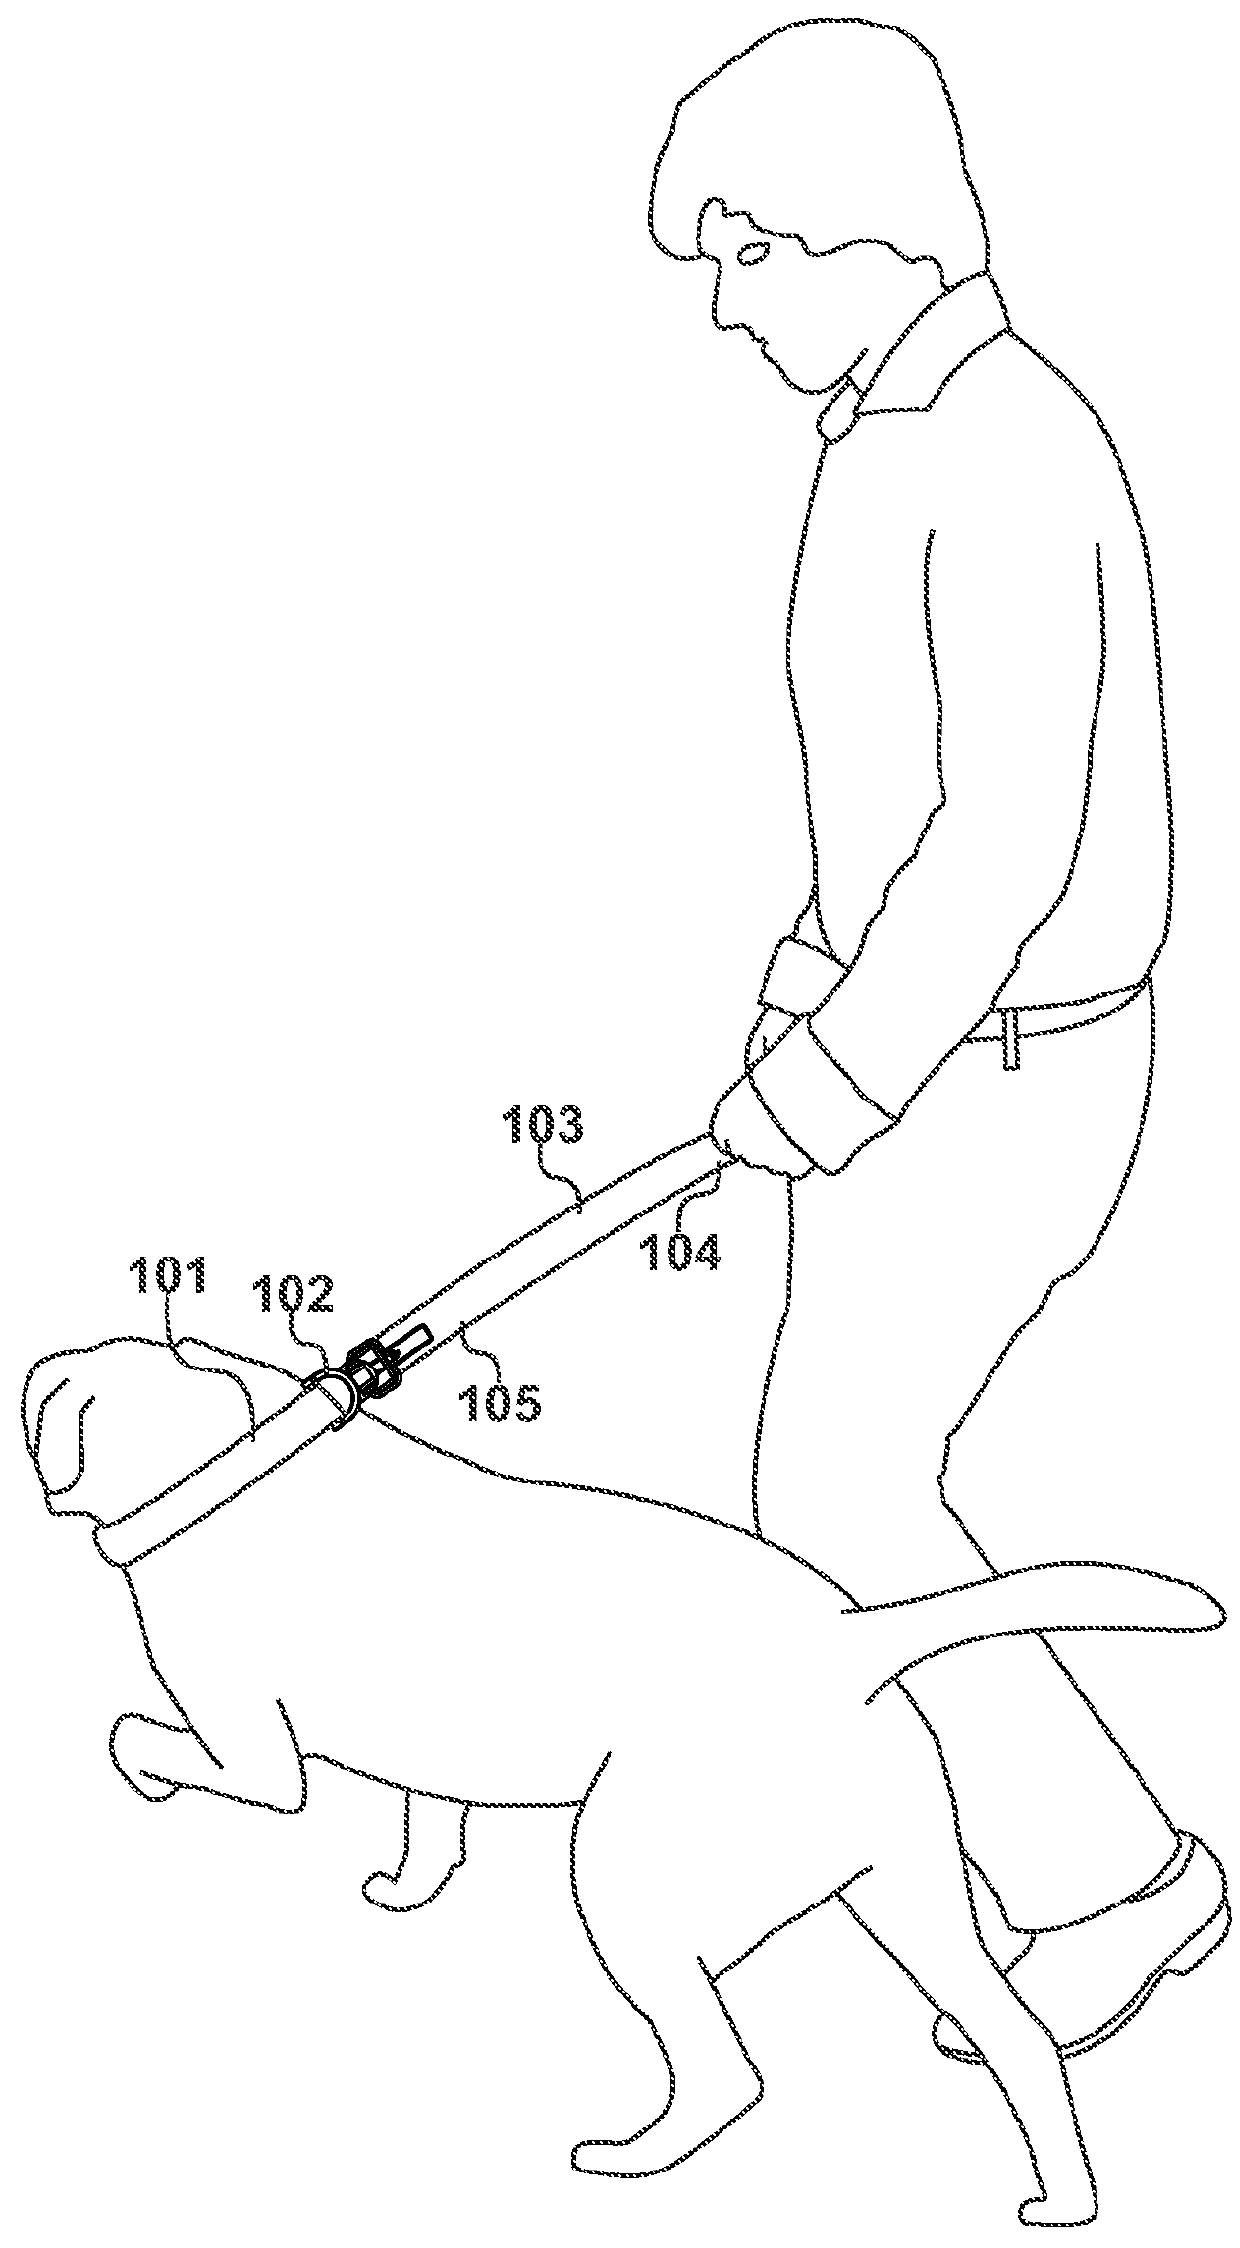 Charging a Device Supported by an Animal